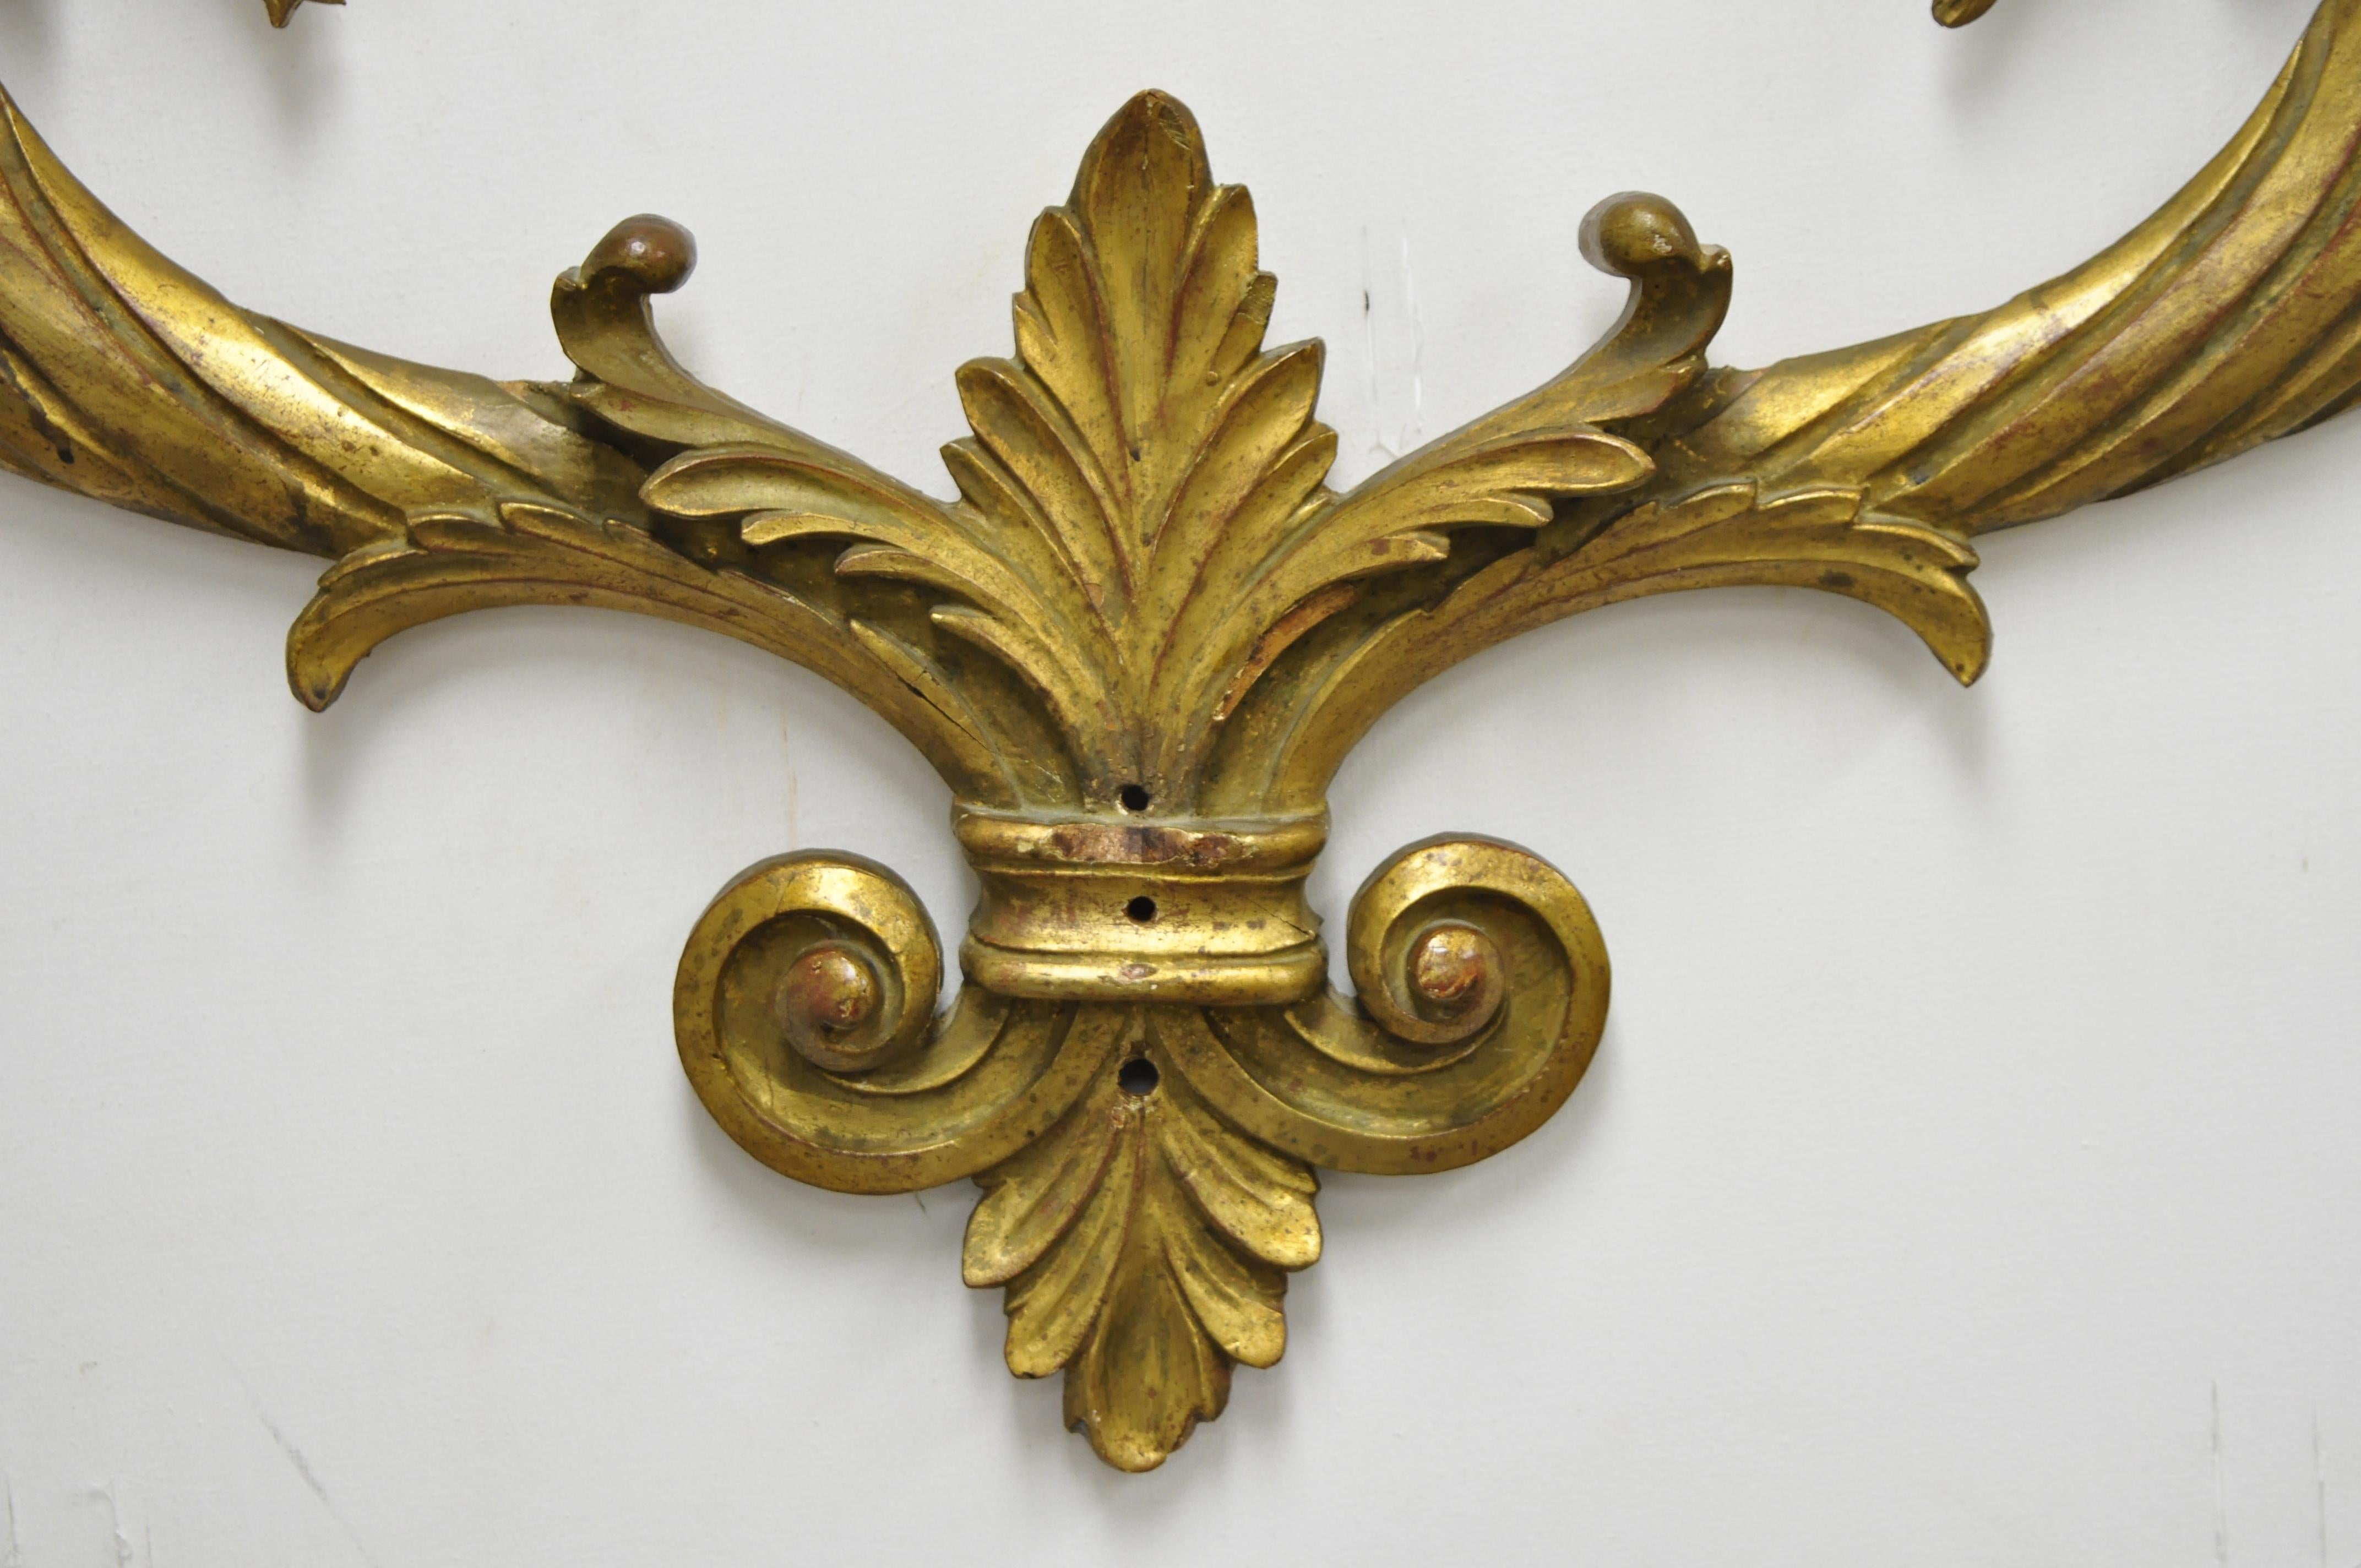 Antique Italian Regency Florentine carved wood cornucopia decorative wall art. Item includes a solid wood carved form, cornucopia design, gold gilt finish, leafy scrollwork, very nice antique item, great style and form, circa early 20th century.